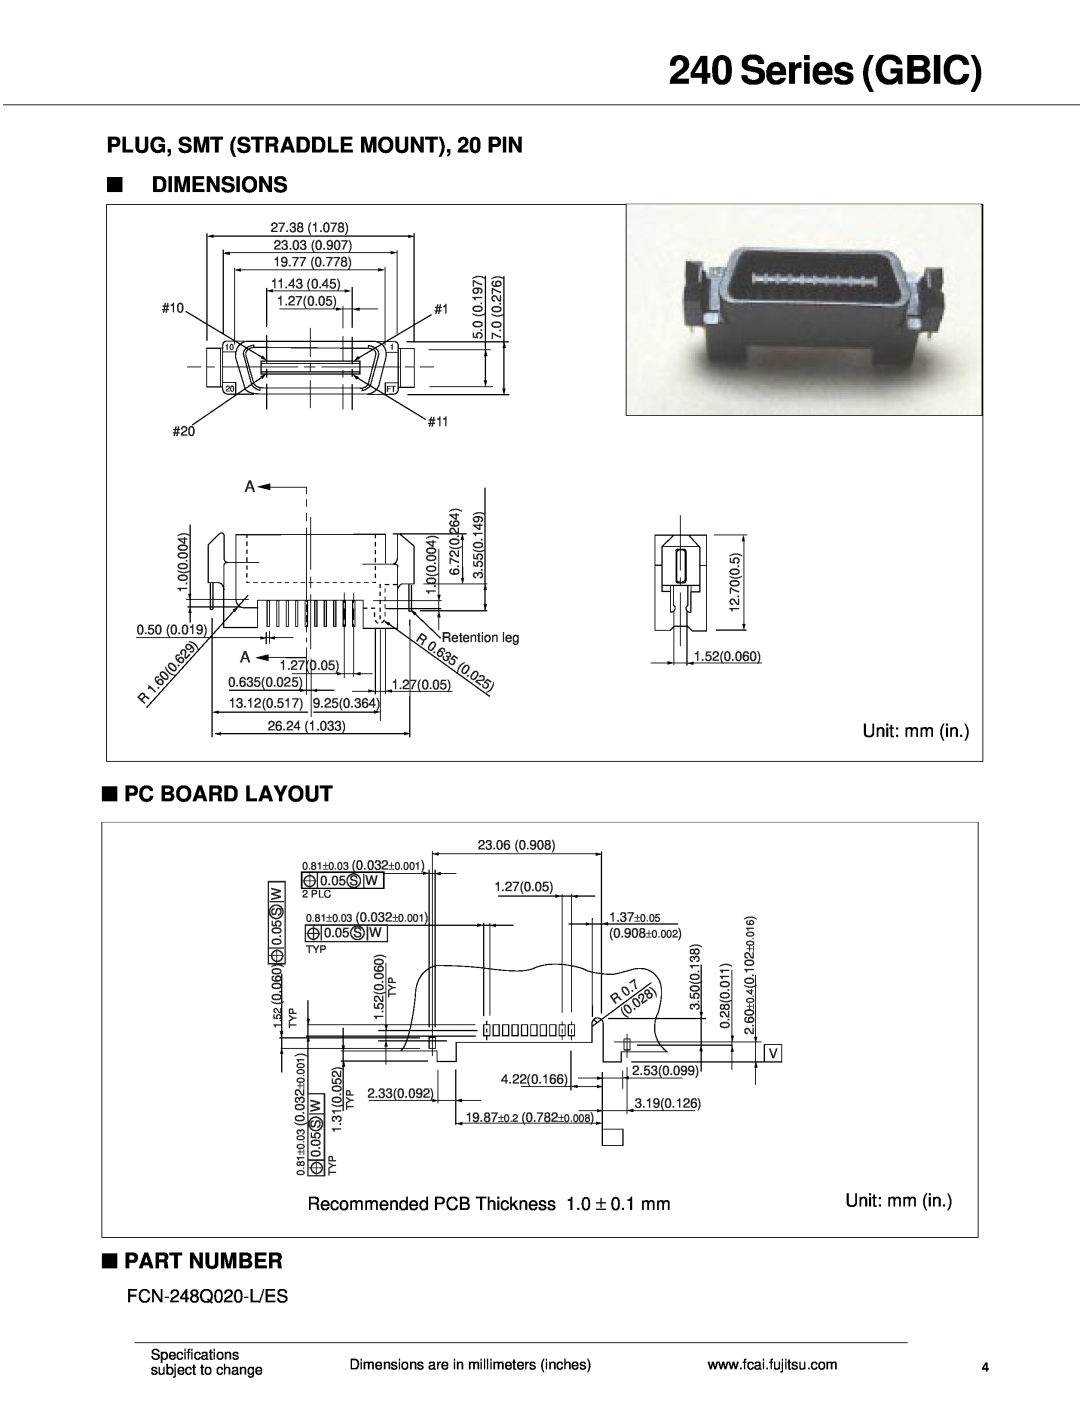 Fujitsu SCA.2, SCA.1 specifications Series GBIC, PLUG, SMT STRADDLE MOUNT, 20 PIN, Dimensions, Pc Board Layout, Part Number 